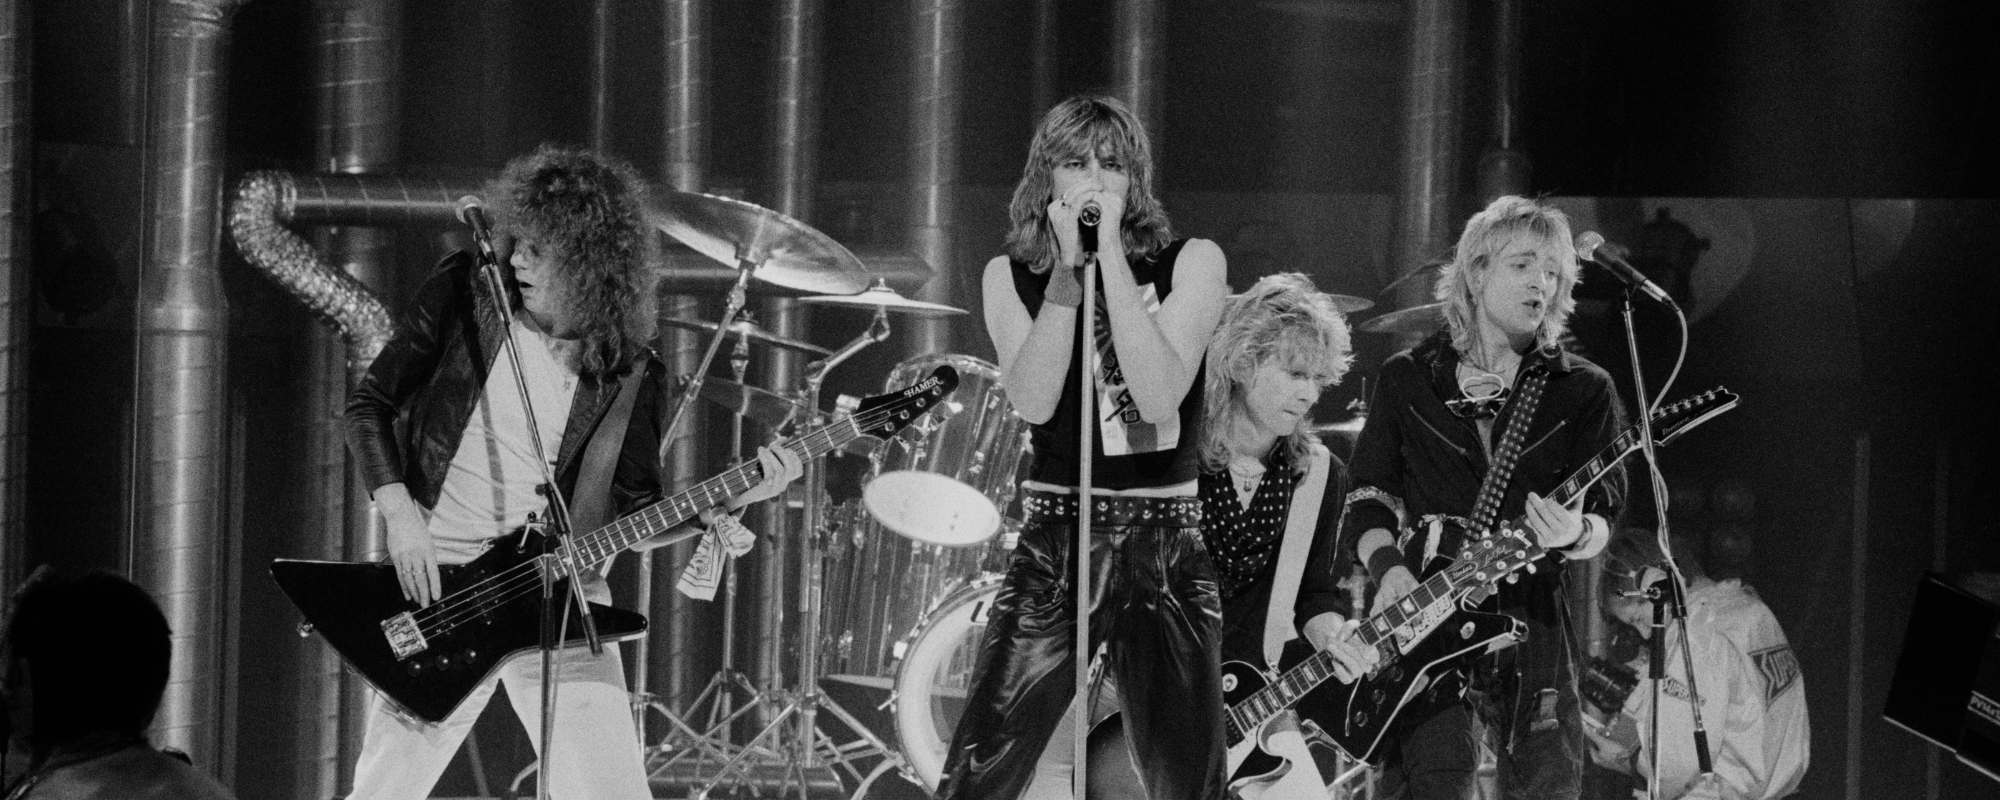 The Meaning Behind Def Leppard’s Desperate “Photograph”